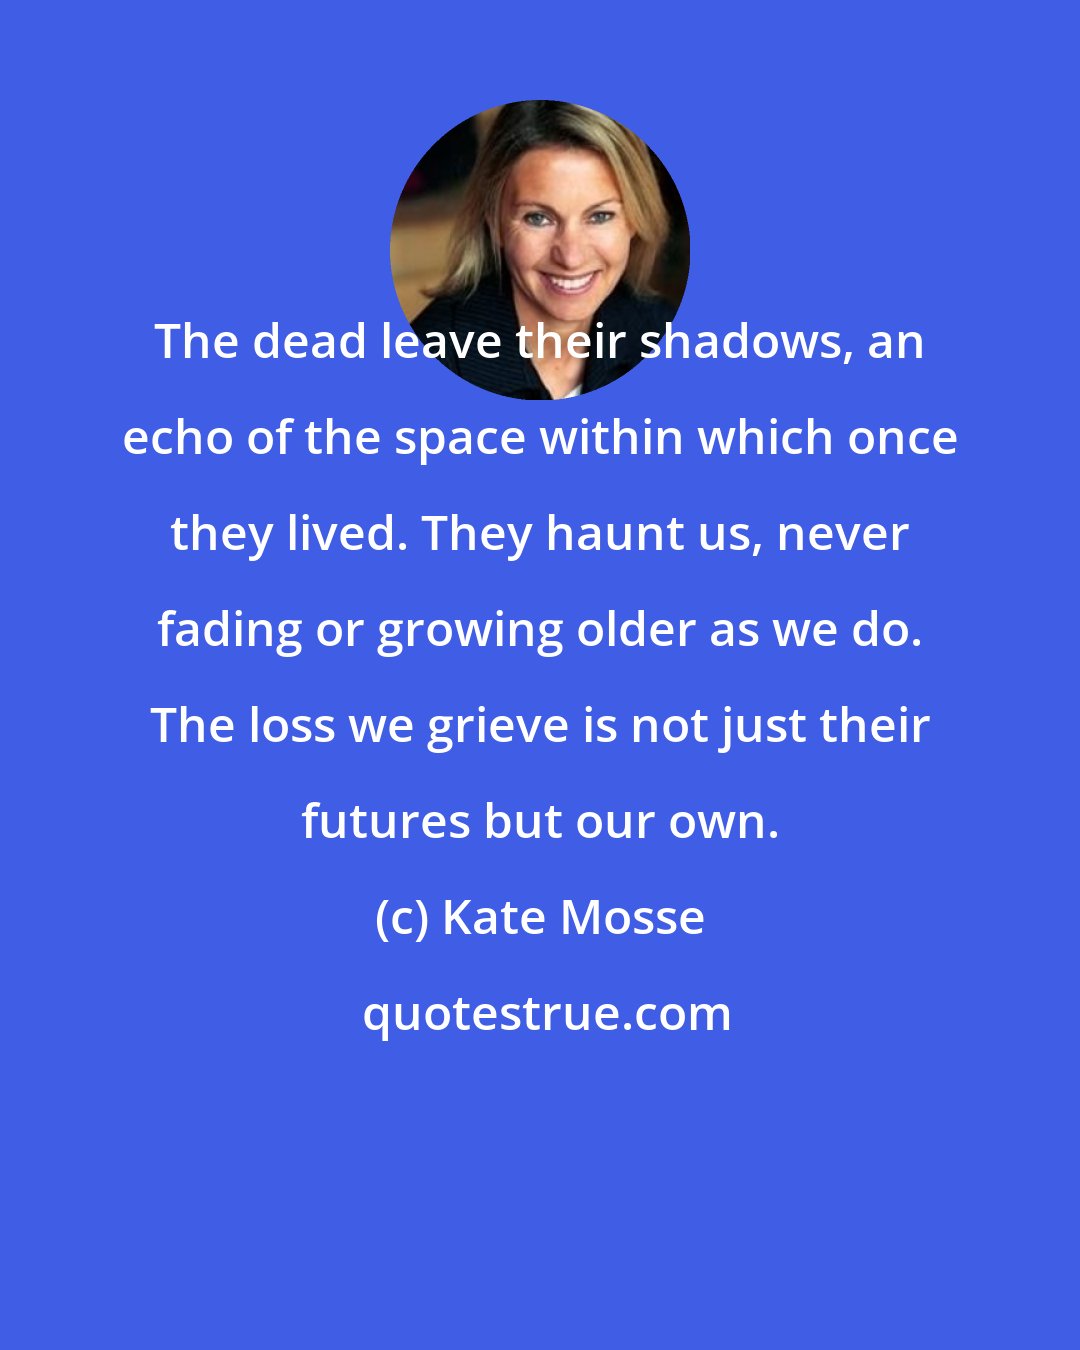 Kate Mosse: The dead leave their shadows, an echo of the space within which once they lived. They haunt us, never fading or growing older as we do. The loss we grieve is not just their futures but our own.